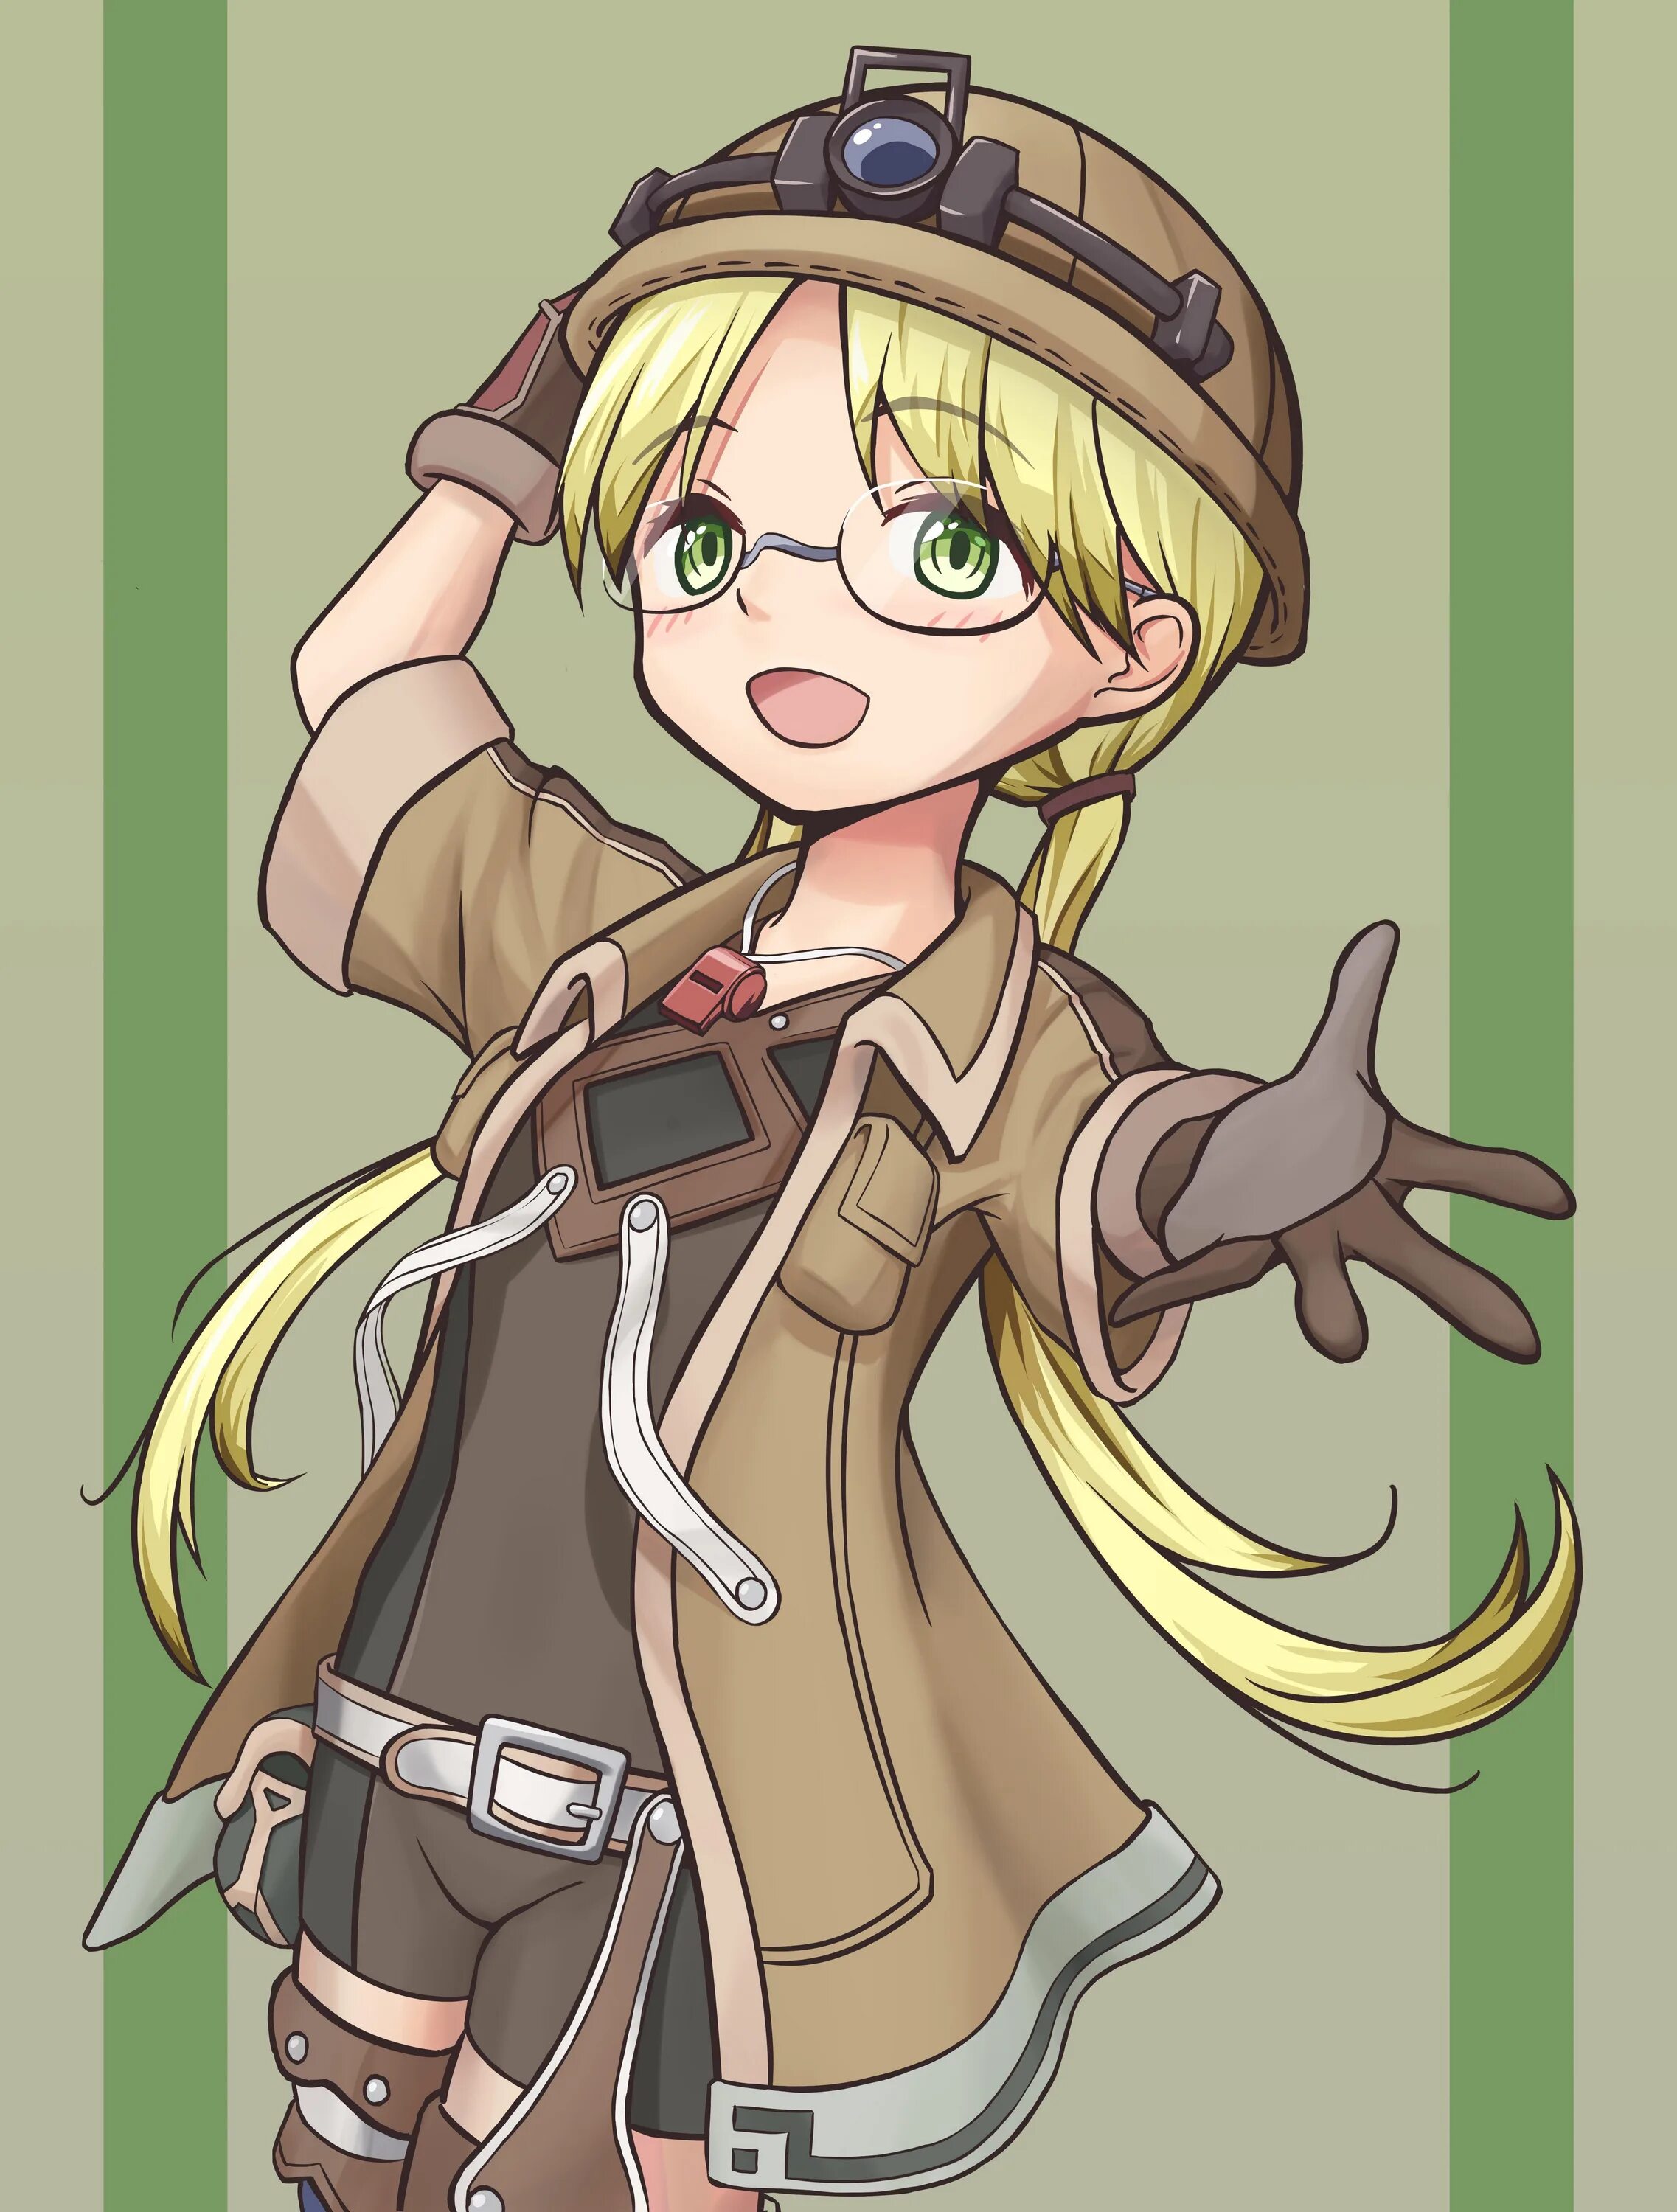 Рико made in Abyss. Рико из made in Abyss. Рико бездна